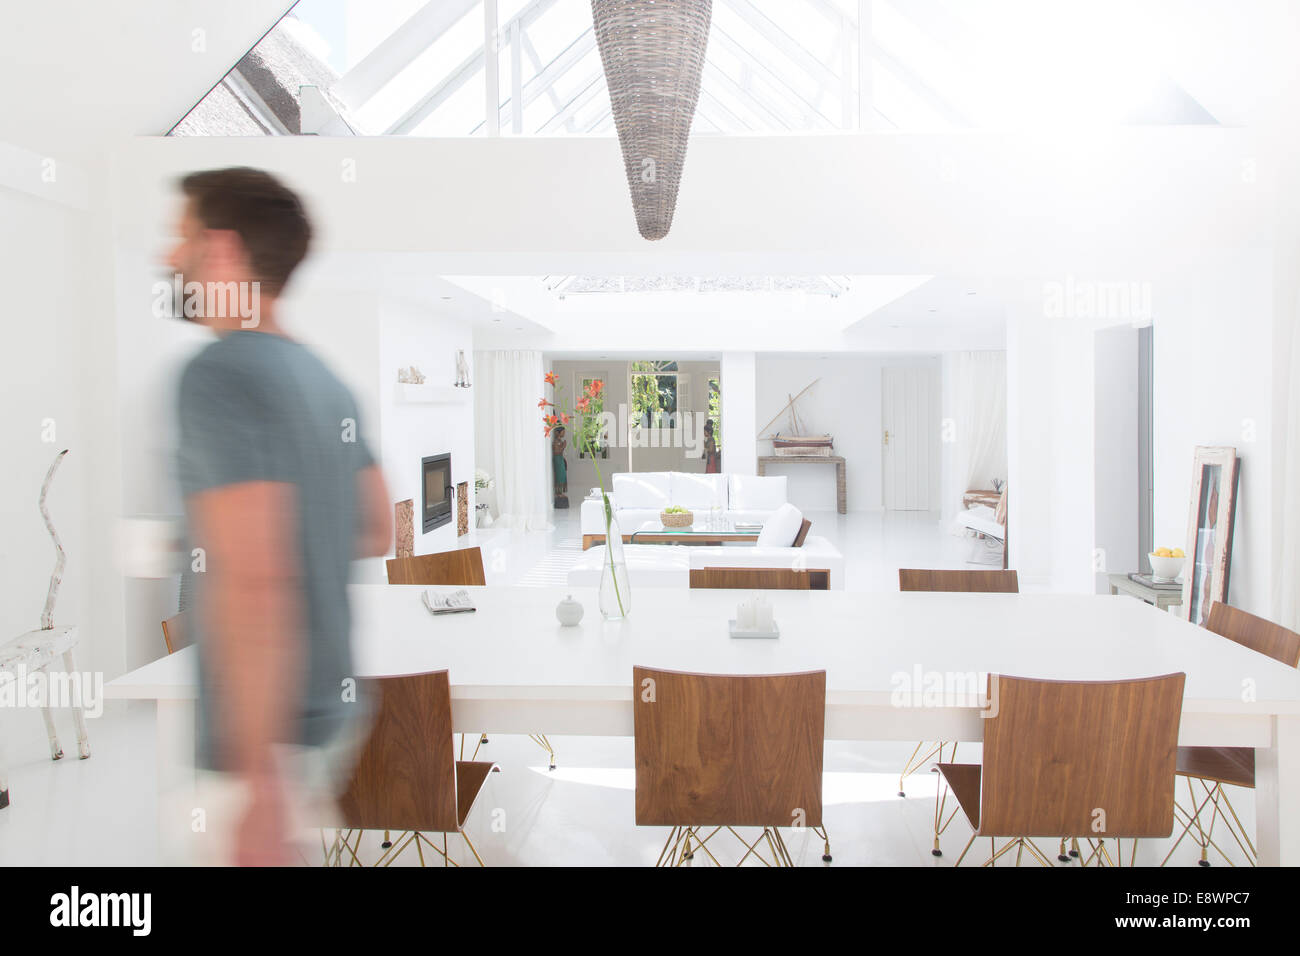 Blurred view of man walking in modern dining room Stock Photo